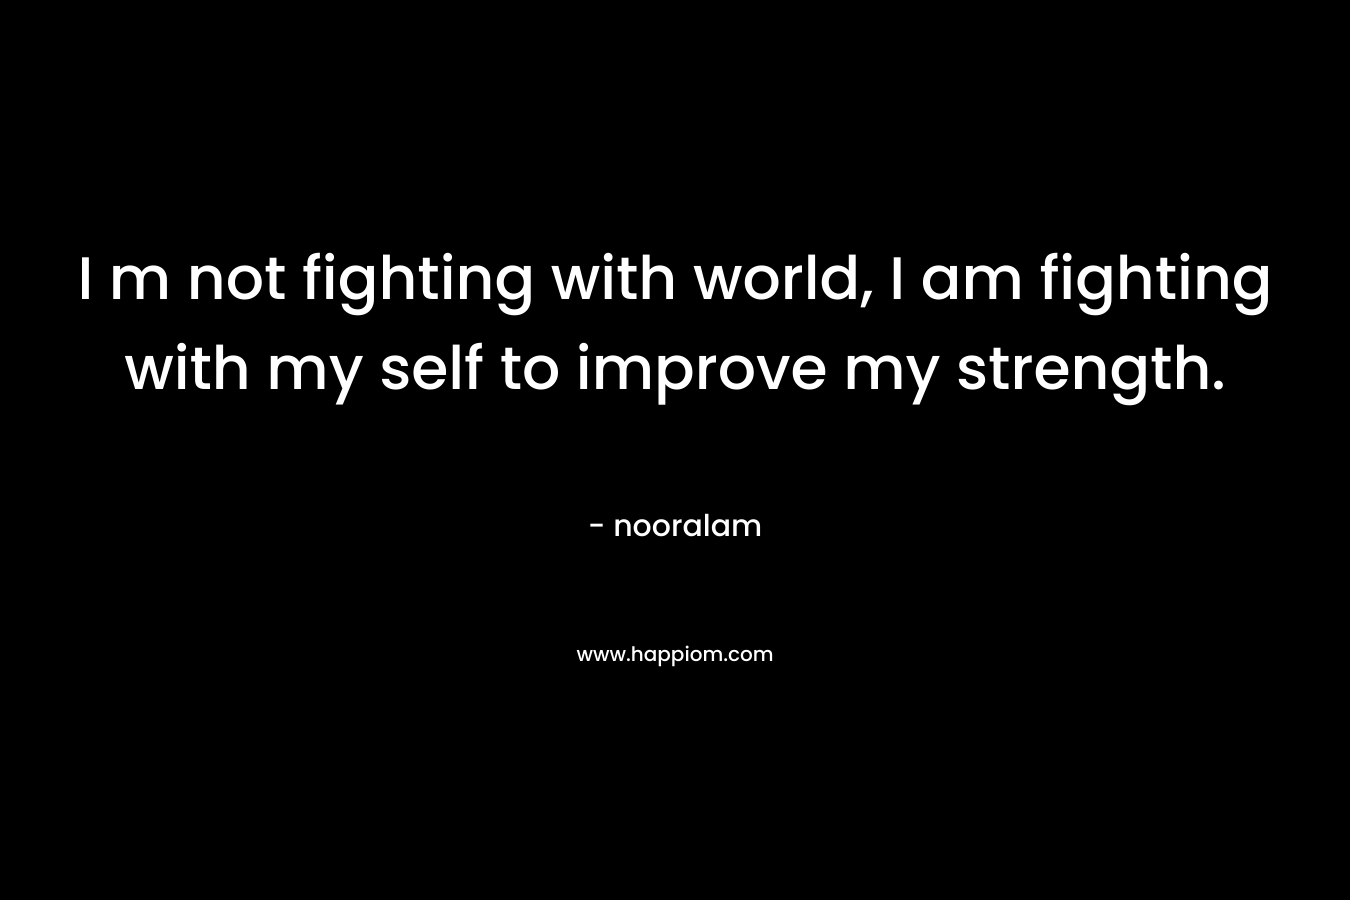 I m not fighting with world, I am fighting with my self to improve my strength.